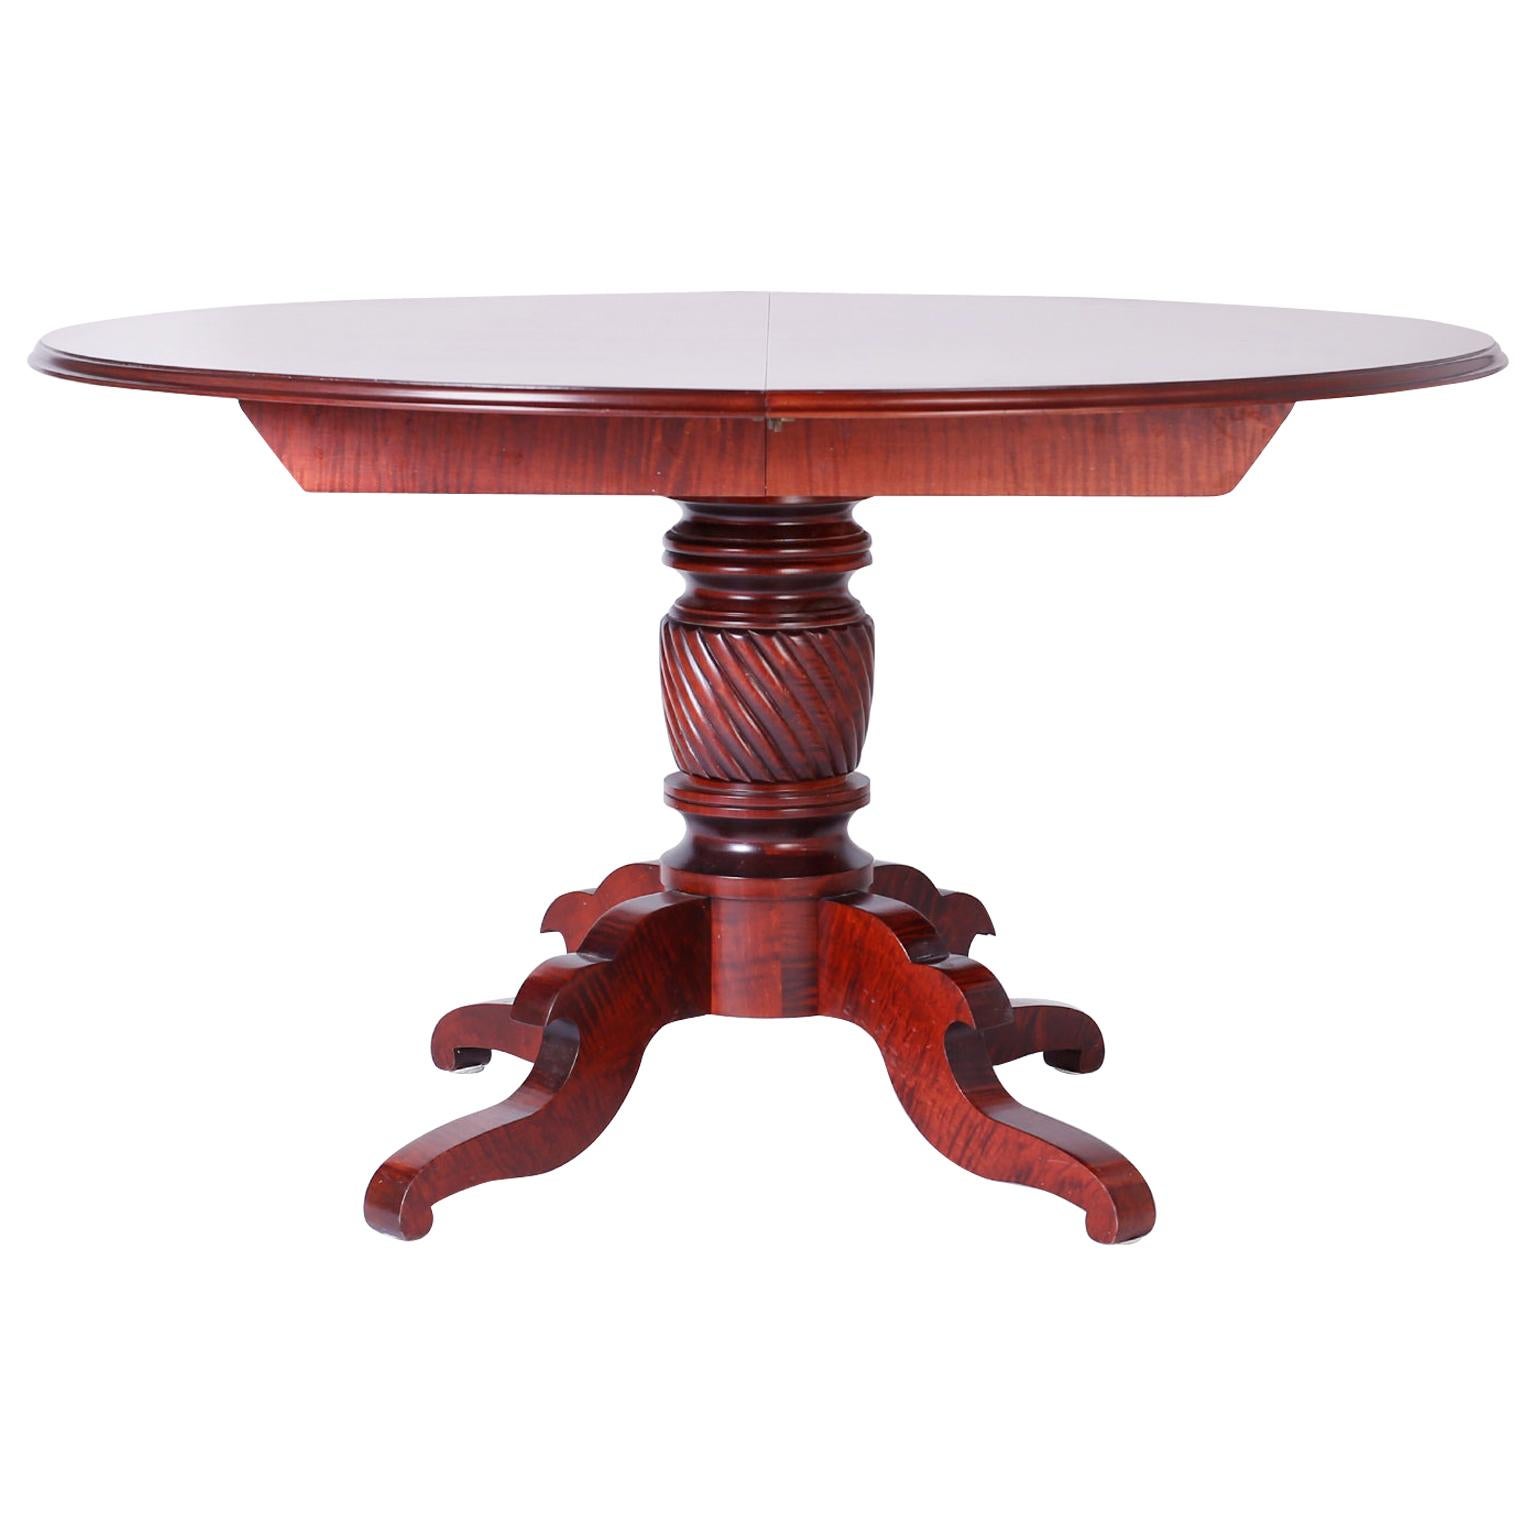 British Colonial or West Indian Style Dining Table